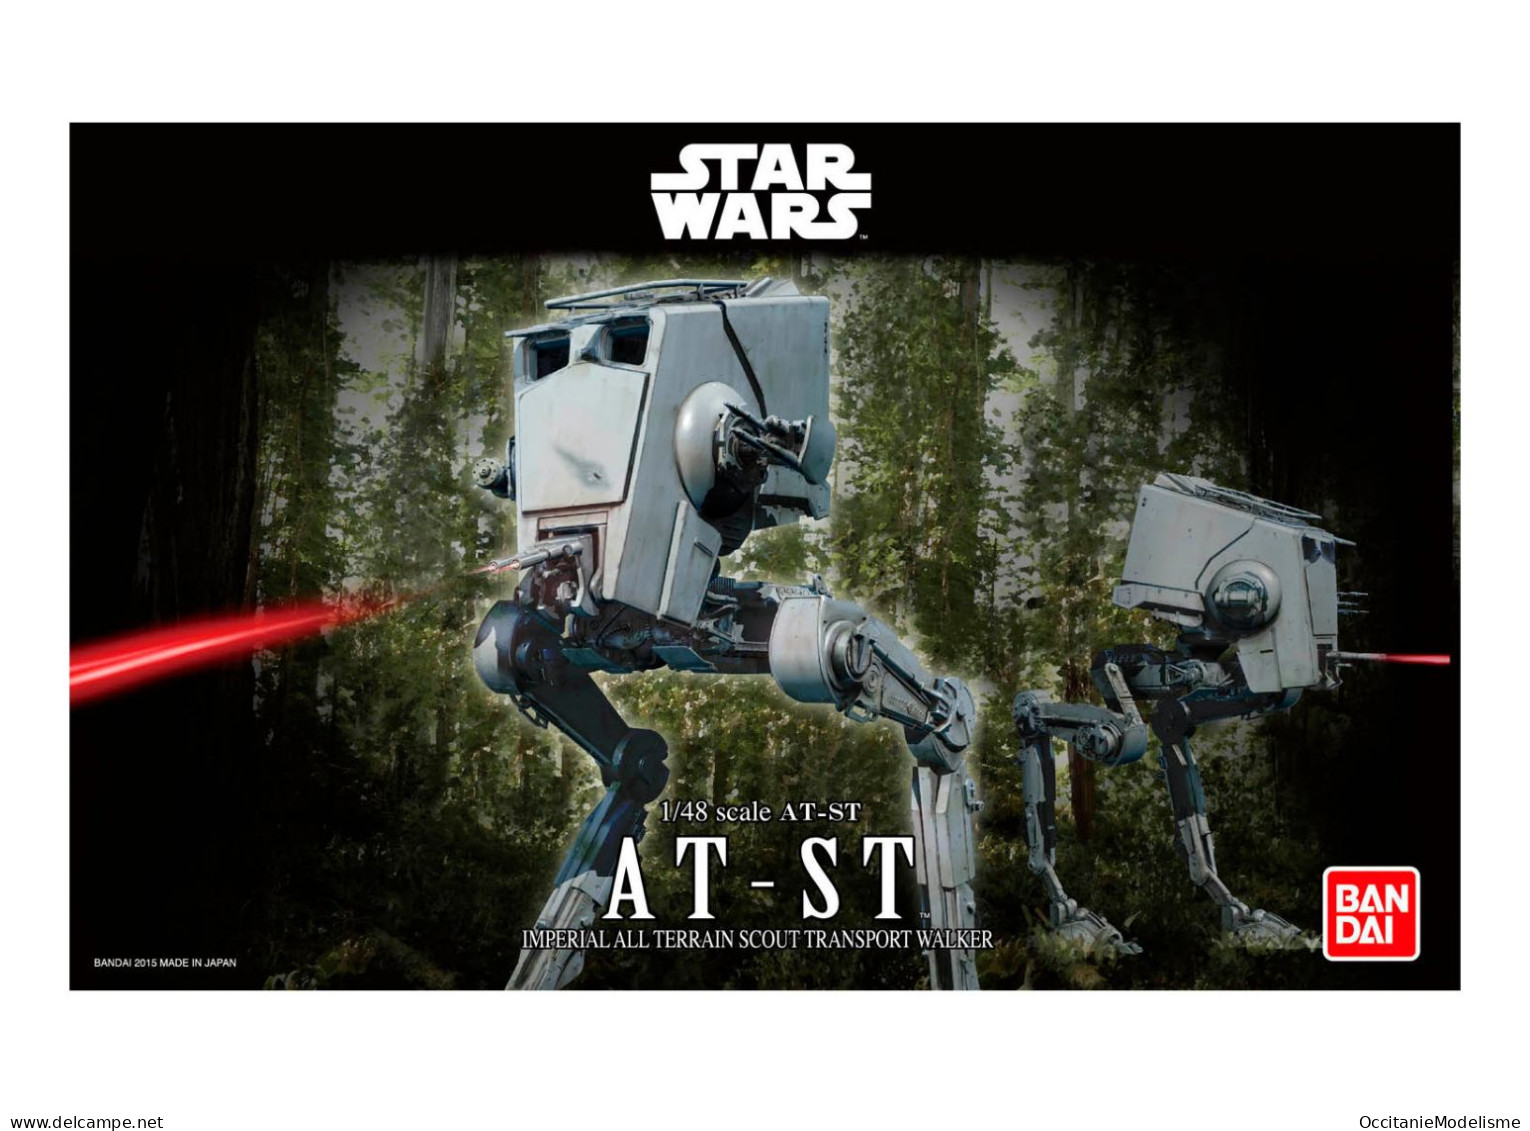 Bandai / Revell - STAR WARS AT-ST Maquette Kit Plastique Réf. 01202 Neuf NBO 1/48 - SF & Robots